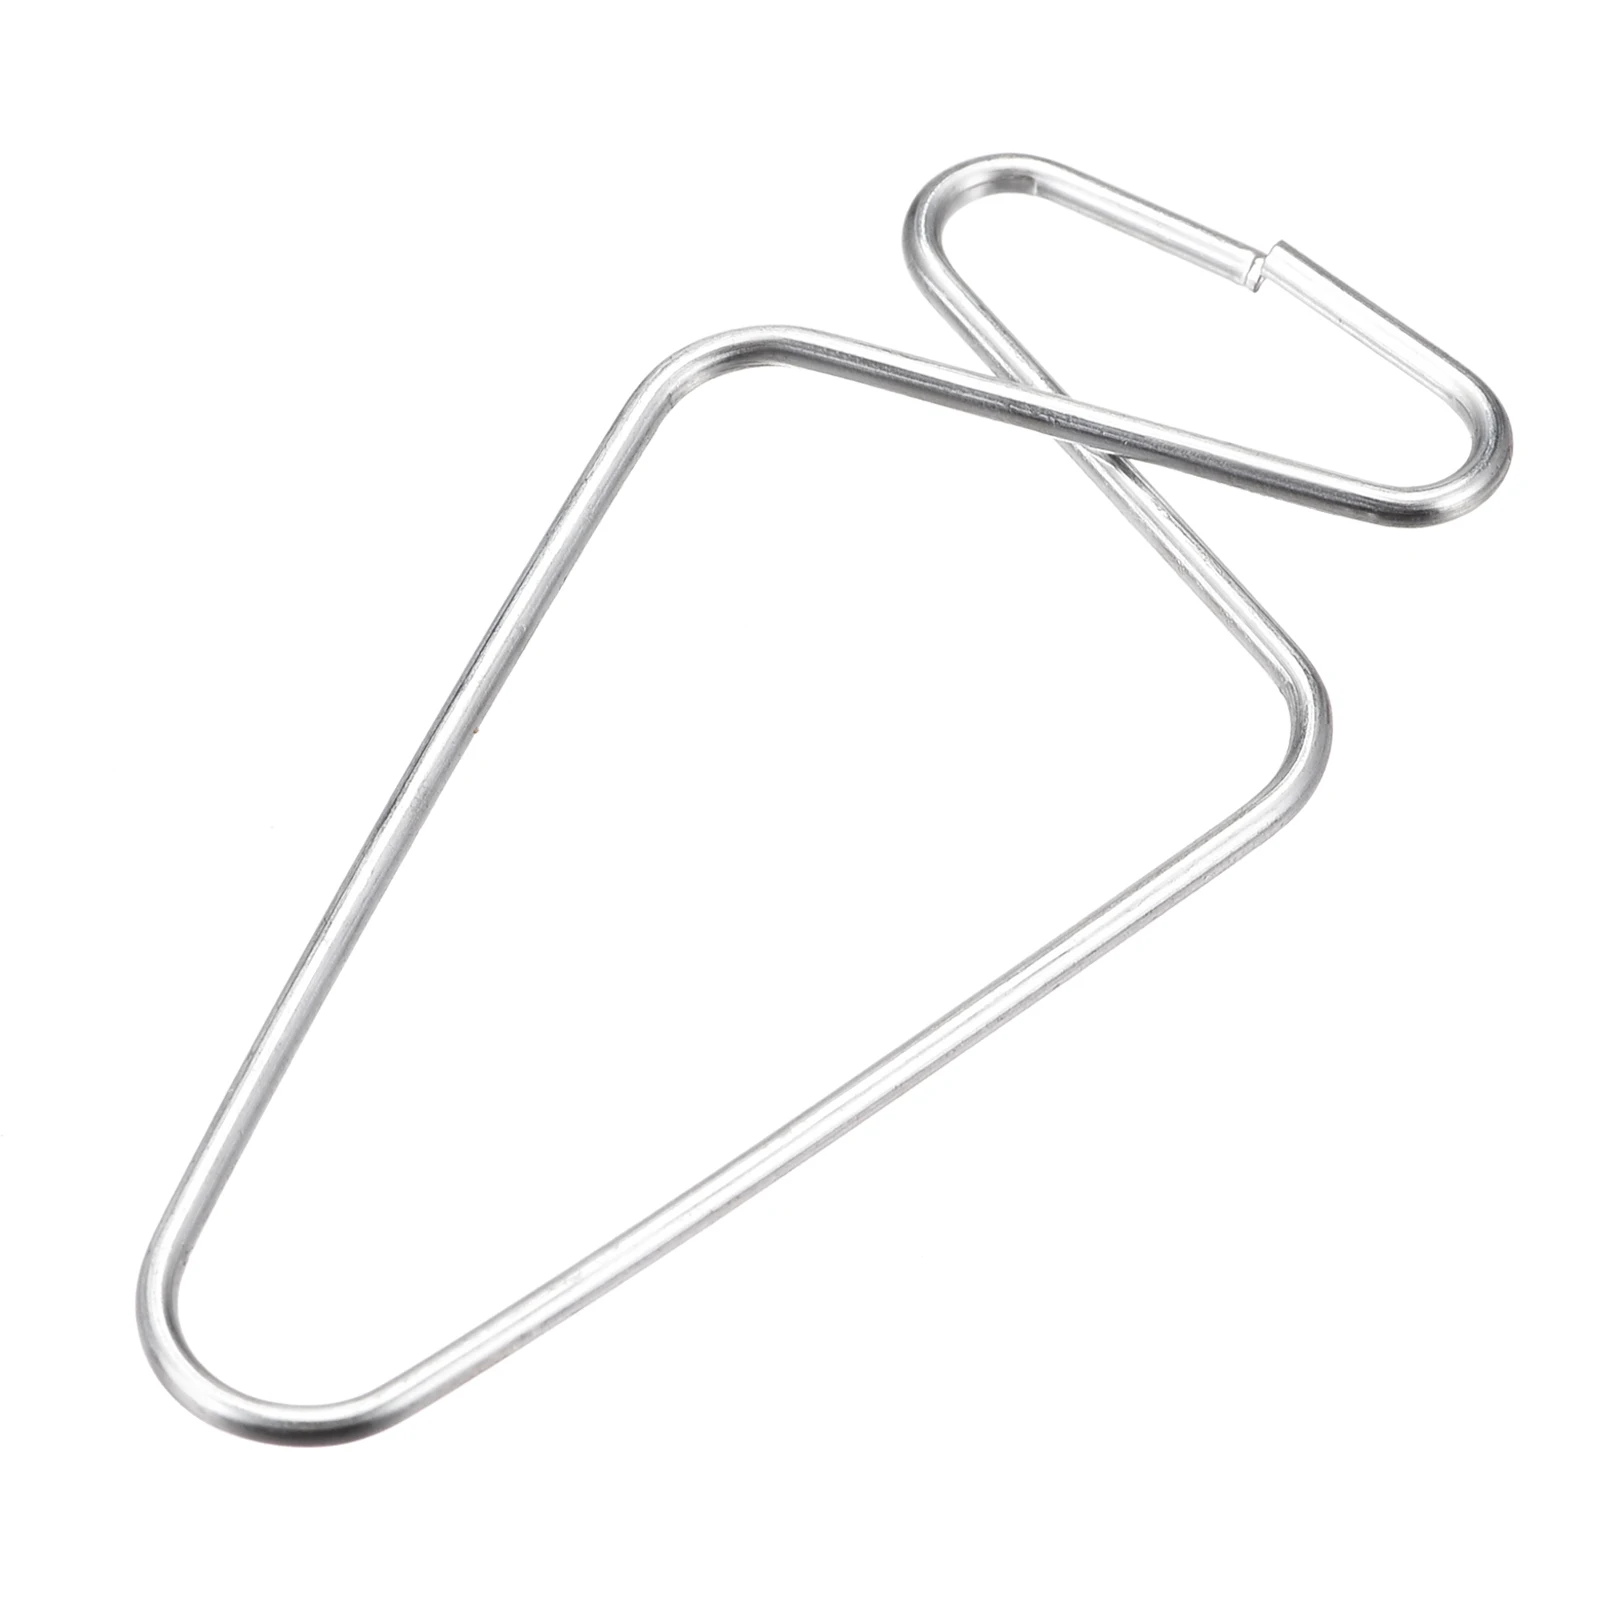 

uxcell Ceiling Hooks Clips Stainless Steel Hangers 2.4 x 1.3 x 0.6 Inch for Home Office Classroom (Silver Finish, 50 Pcs)